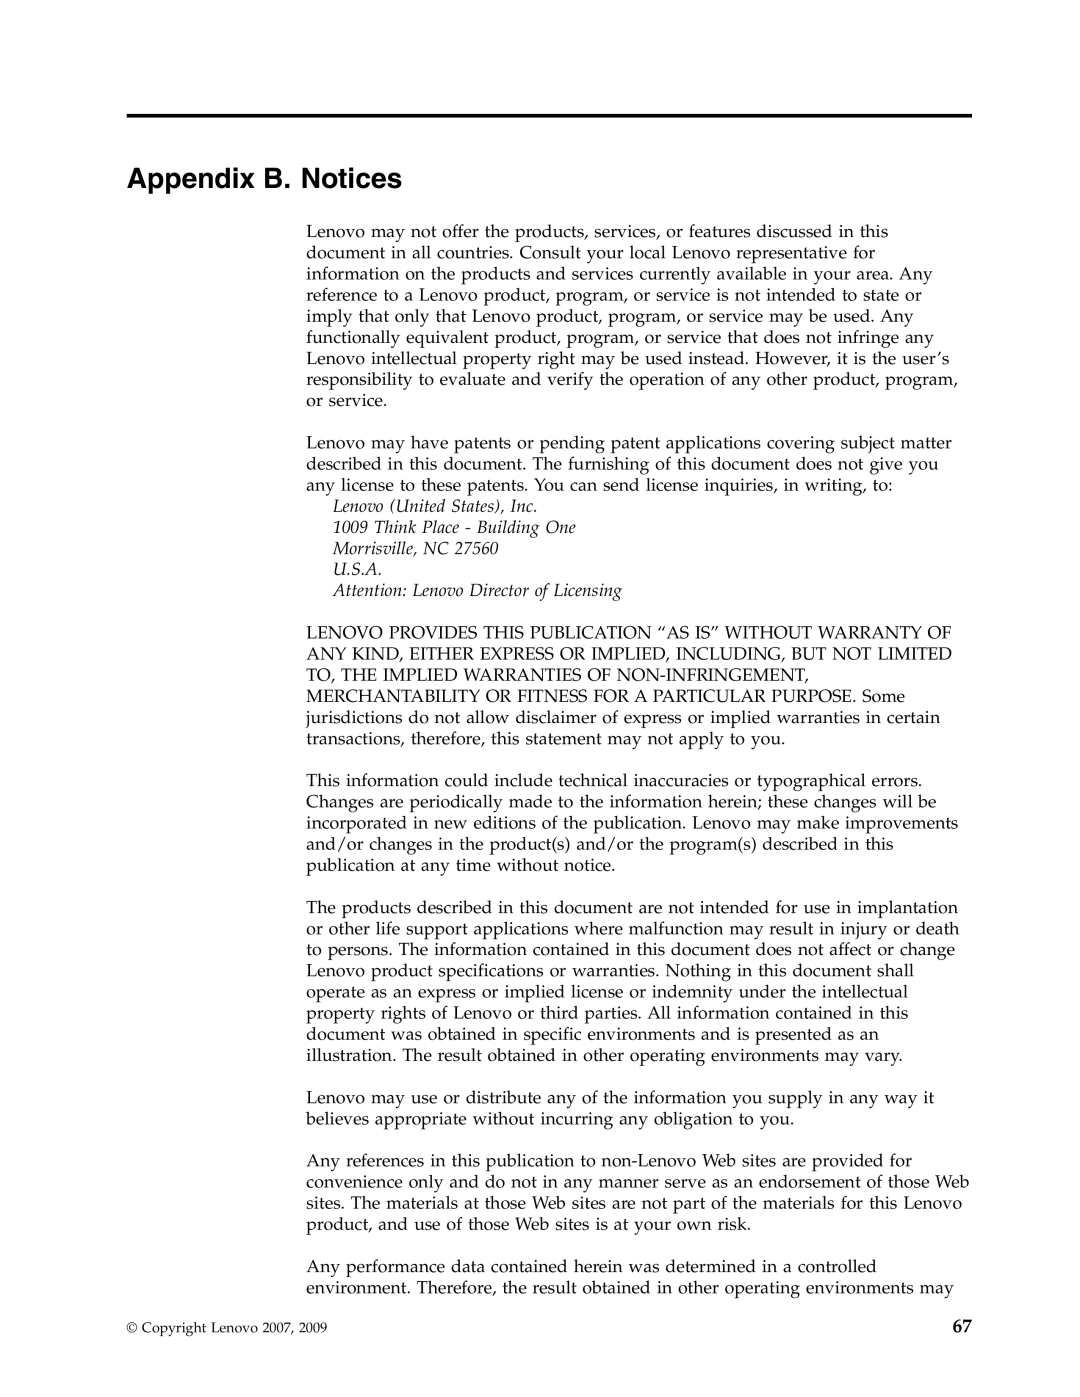 Lenovo 6019 manual Appendix B. Notices, Lenovo United States, Inc, Think Place - Building One Morrisville, NC 